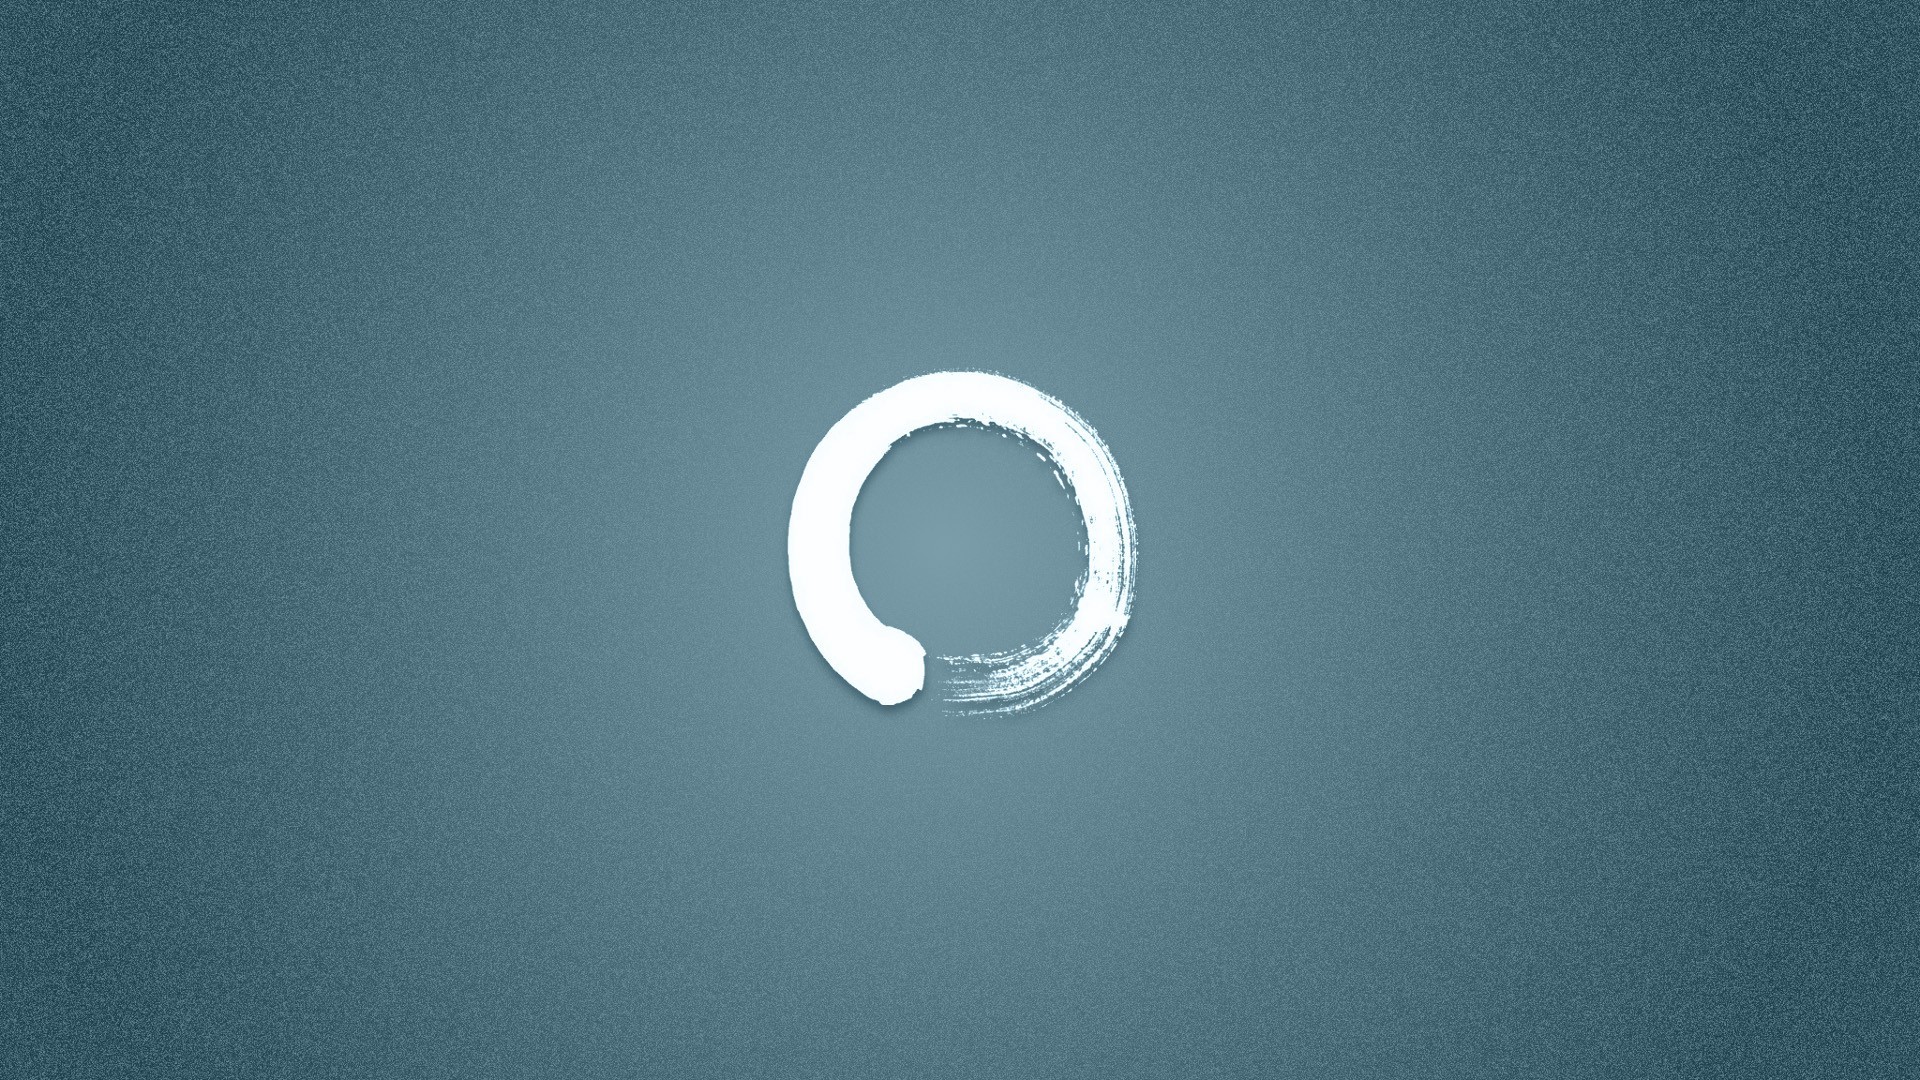 General 1920x1080 abstract digital art circle simple background ensō minimalism ouroboros blue background